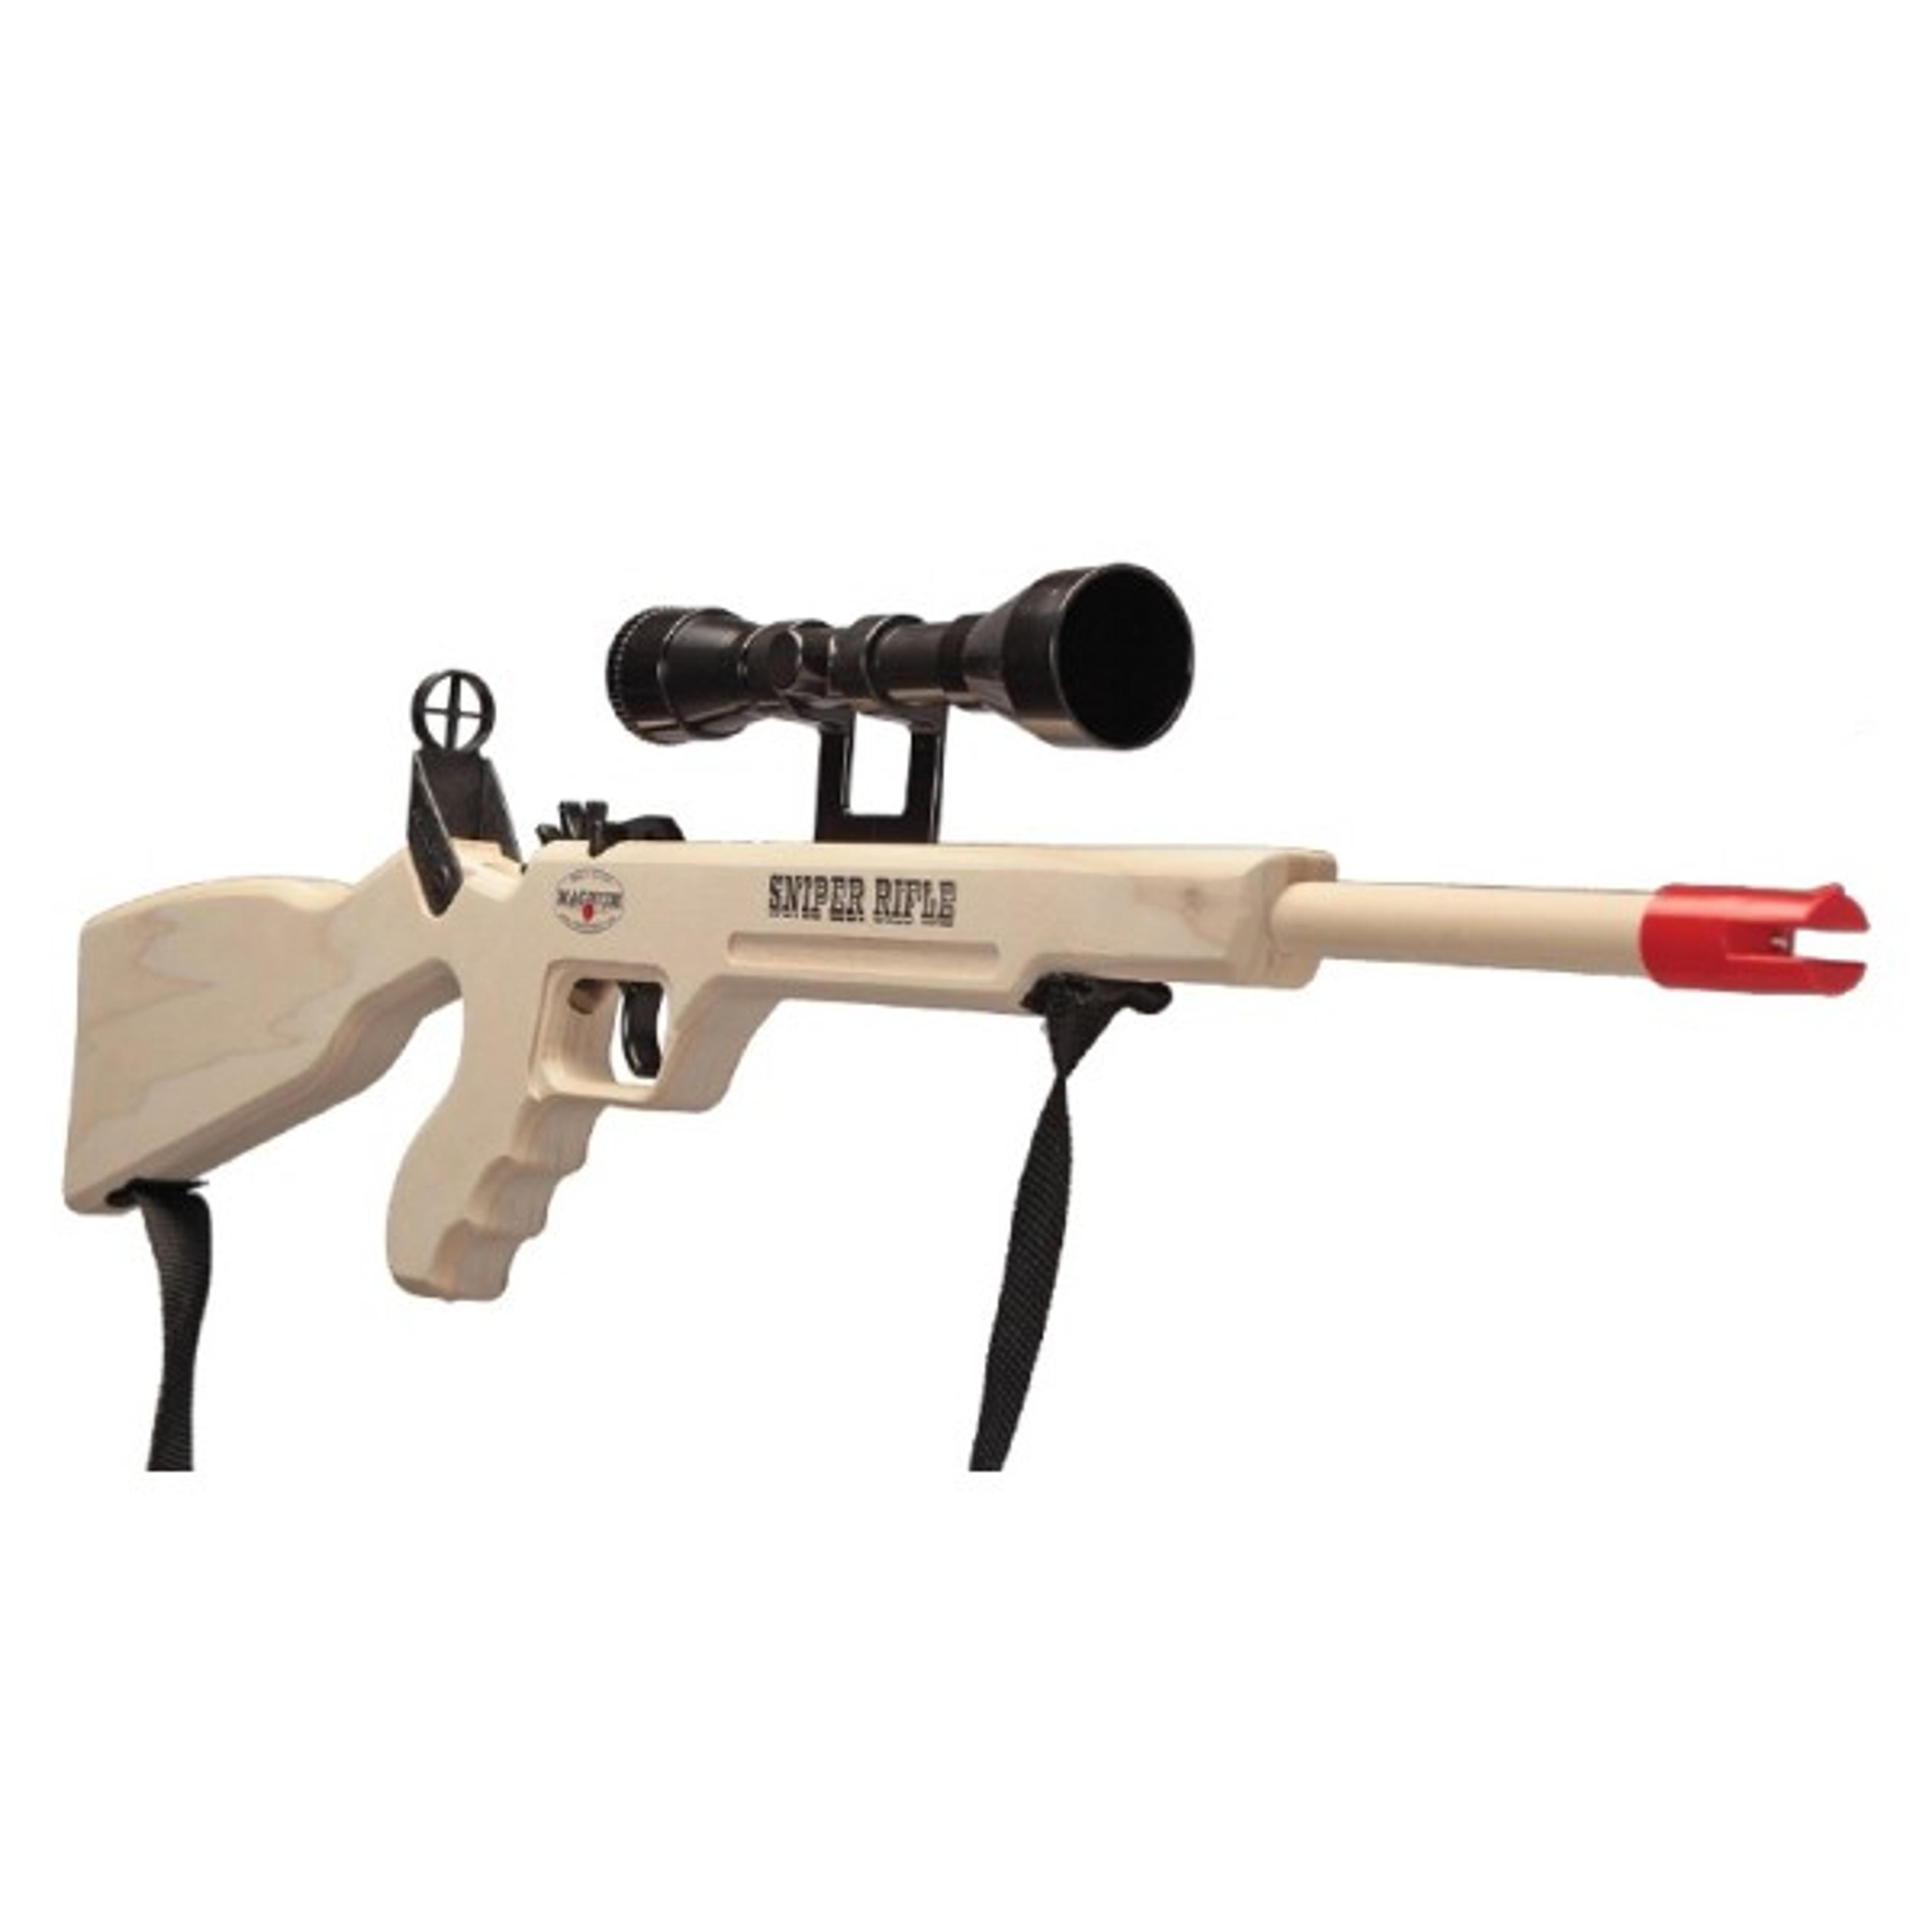 Magnum Wooden Sniper Rifle with Scope and Sling